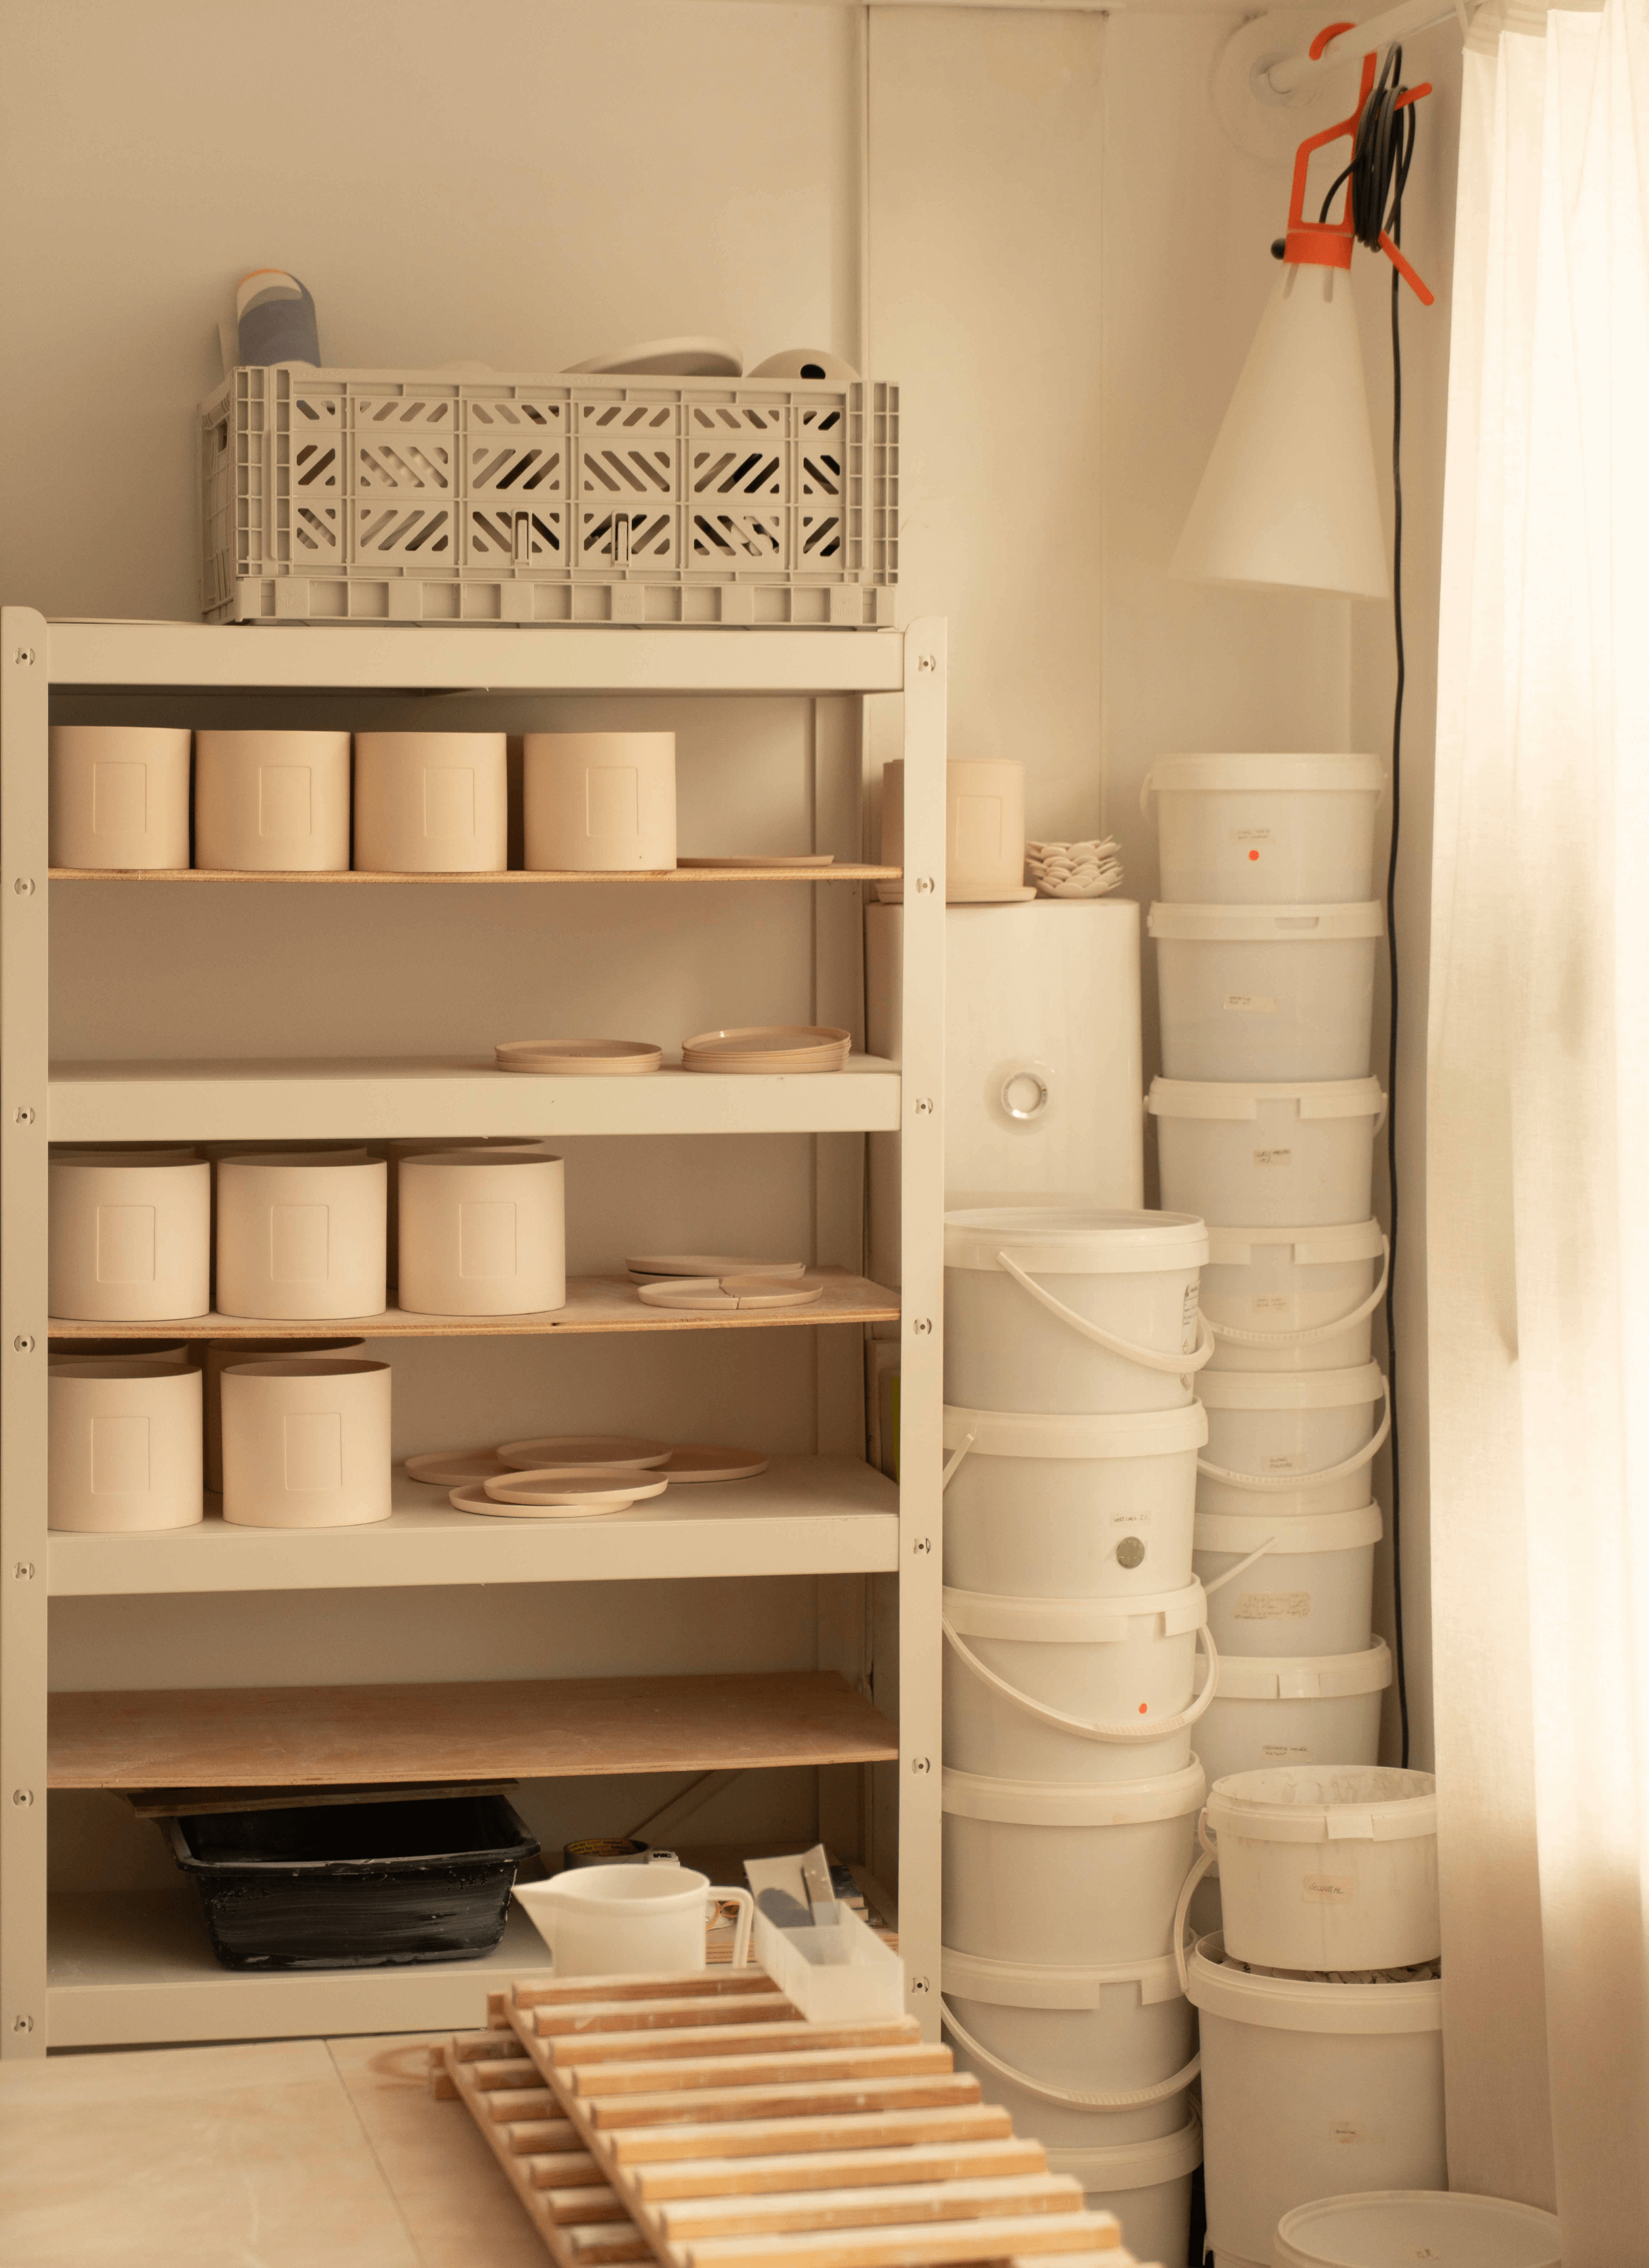 In the corner of the room, stacks of plastic buckets are neatly arranged next to a shelf filled with ceramic pots and saucers. Wooden crates are scattered on the floor nearby, adding to the rustic charm of the space.